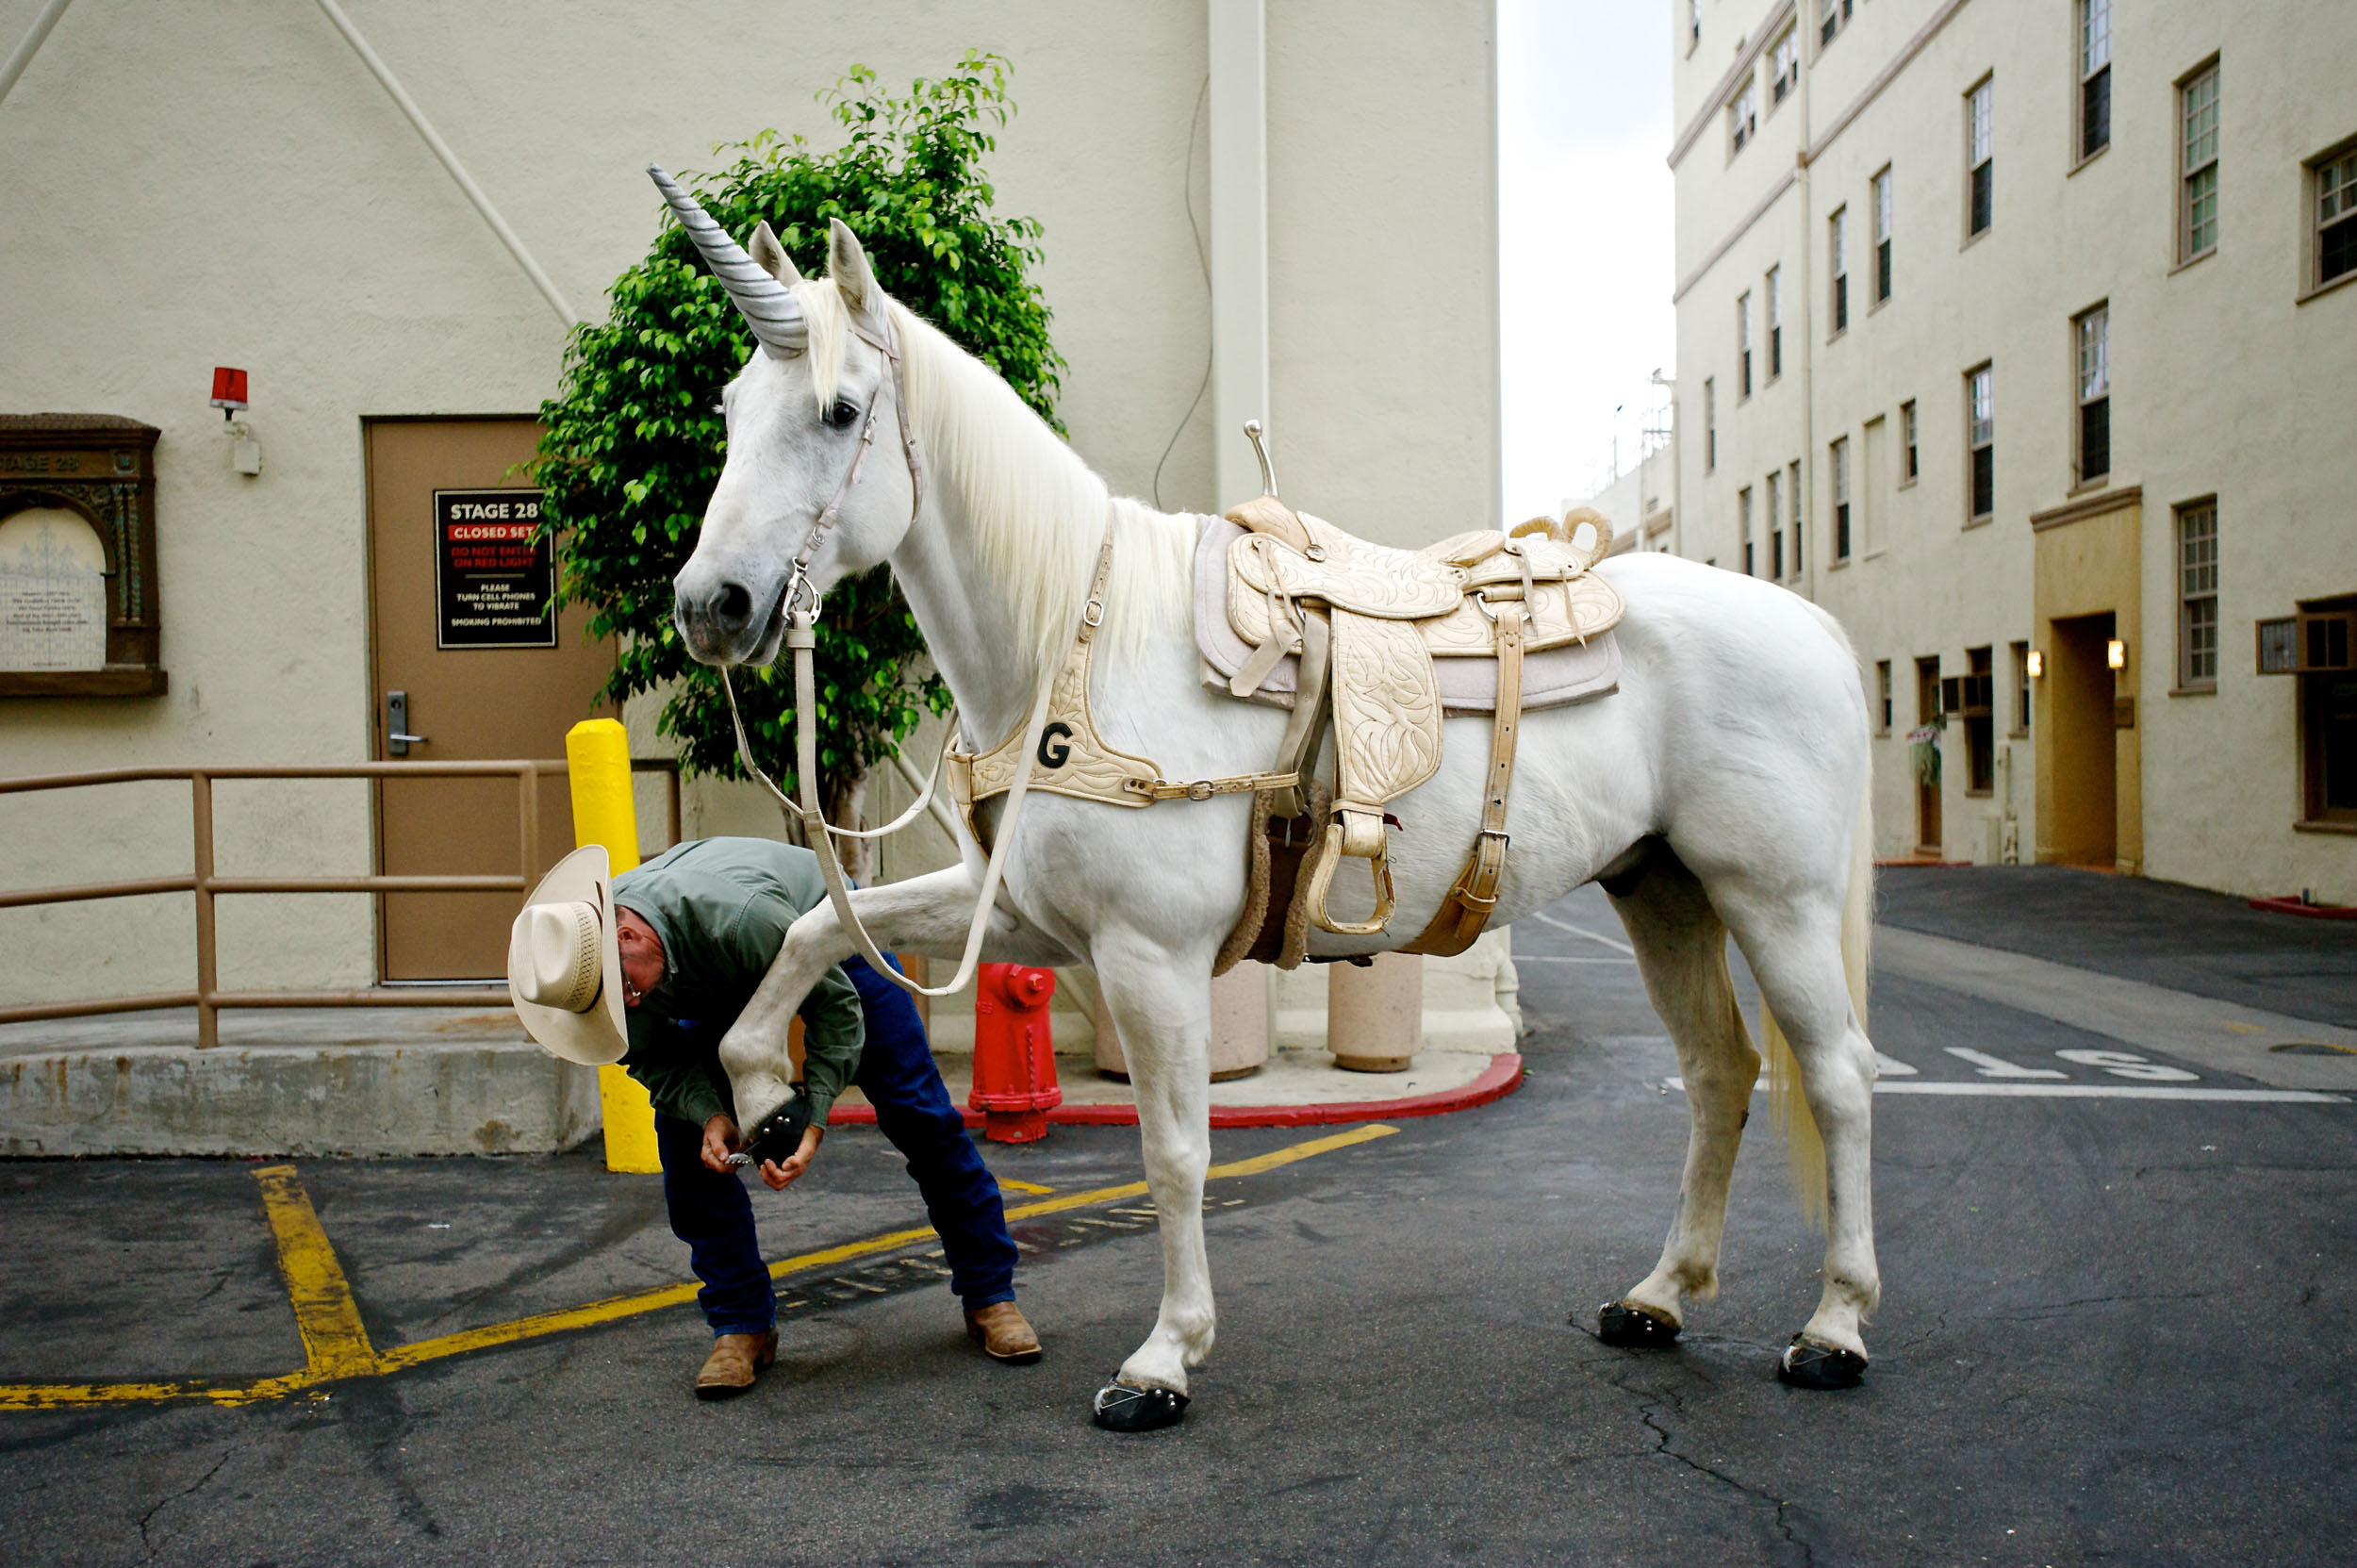 A man adjusts the horse shoe of a unicorn at Paramount Studios in Hollywood.